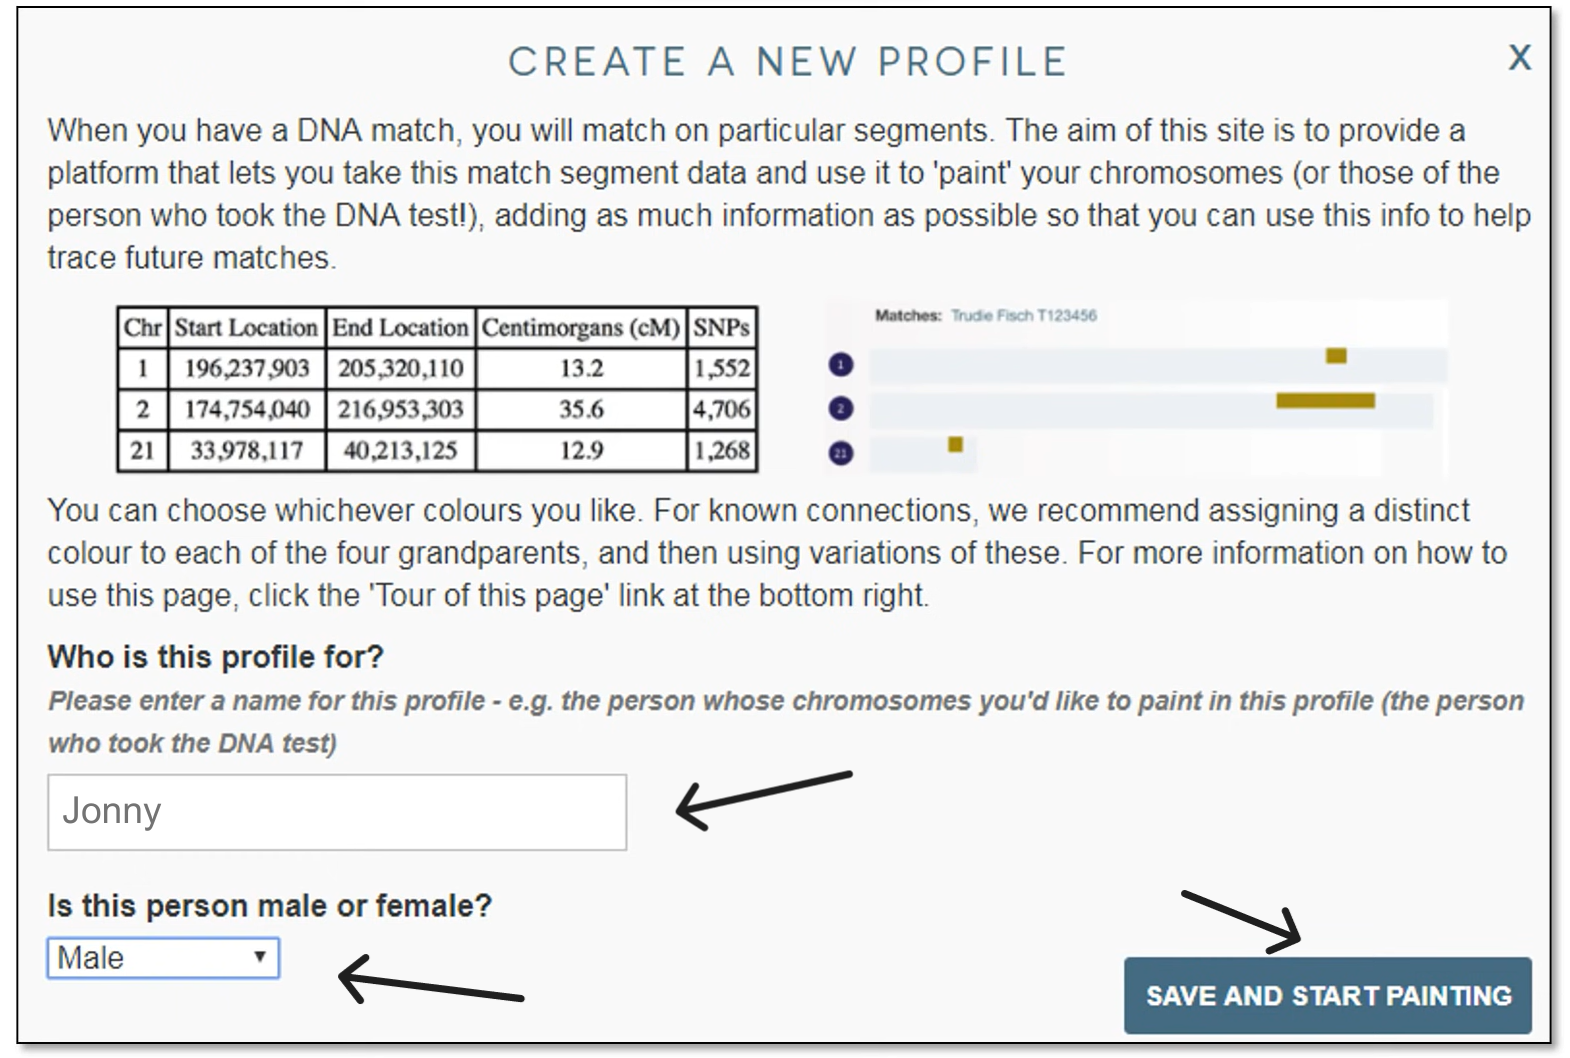 A screenshot from the DNA painter website, indicating how to start painting